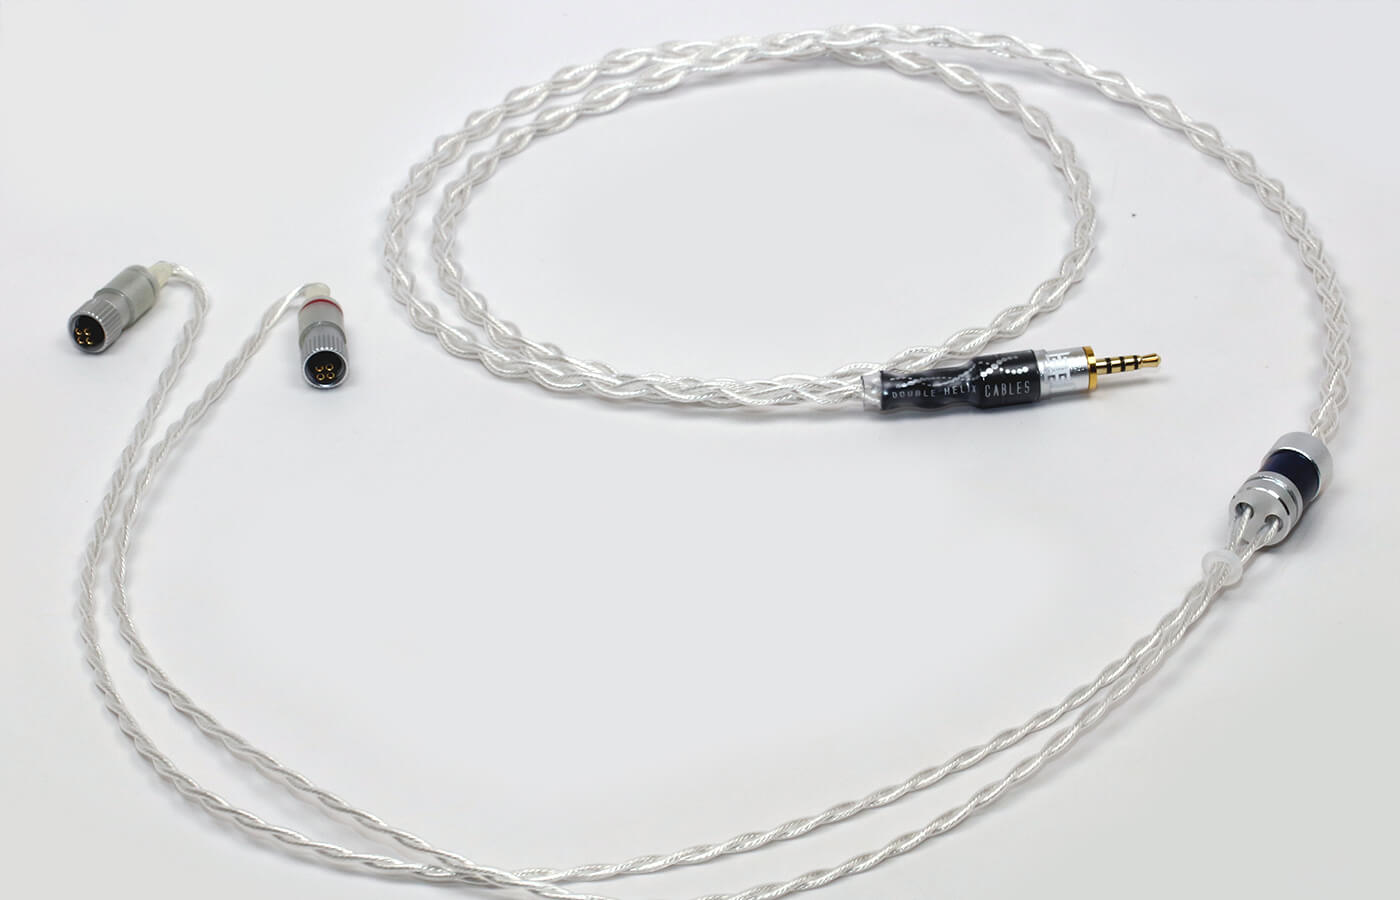 double-helix-cables-dhc-occ-litz-headphone-cable-eidolic-symbiote-sirens-layla-roxanne